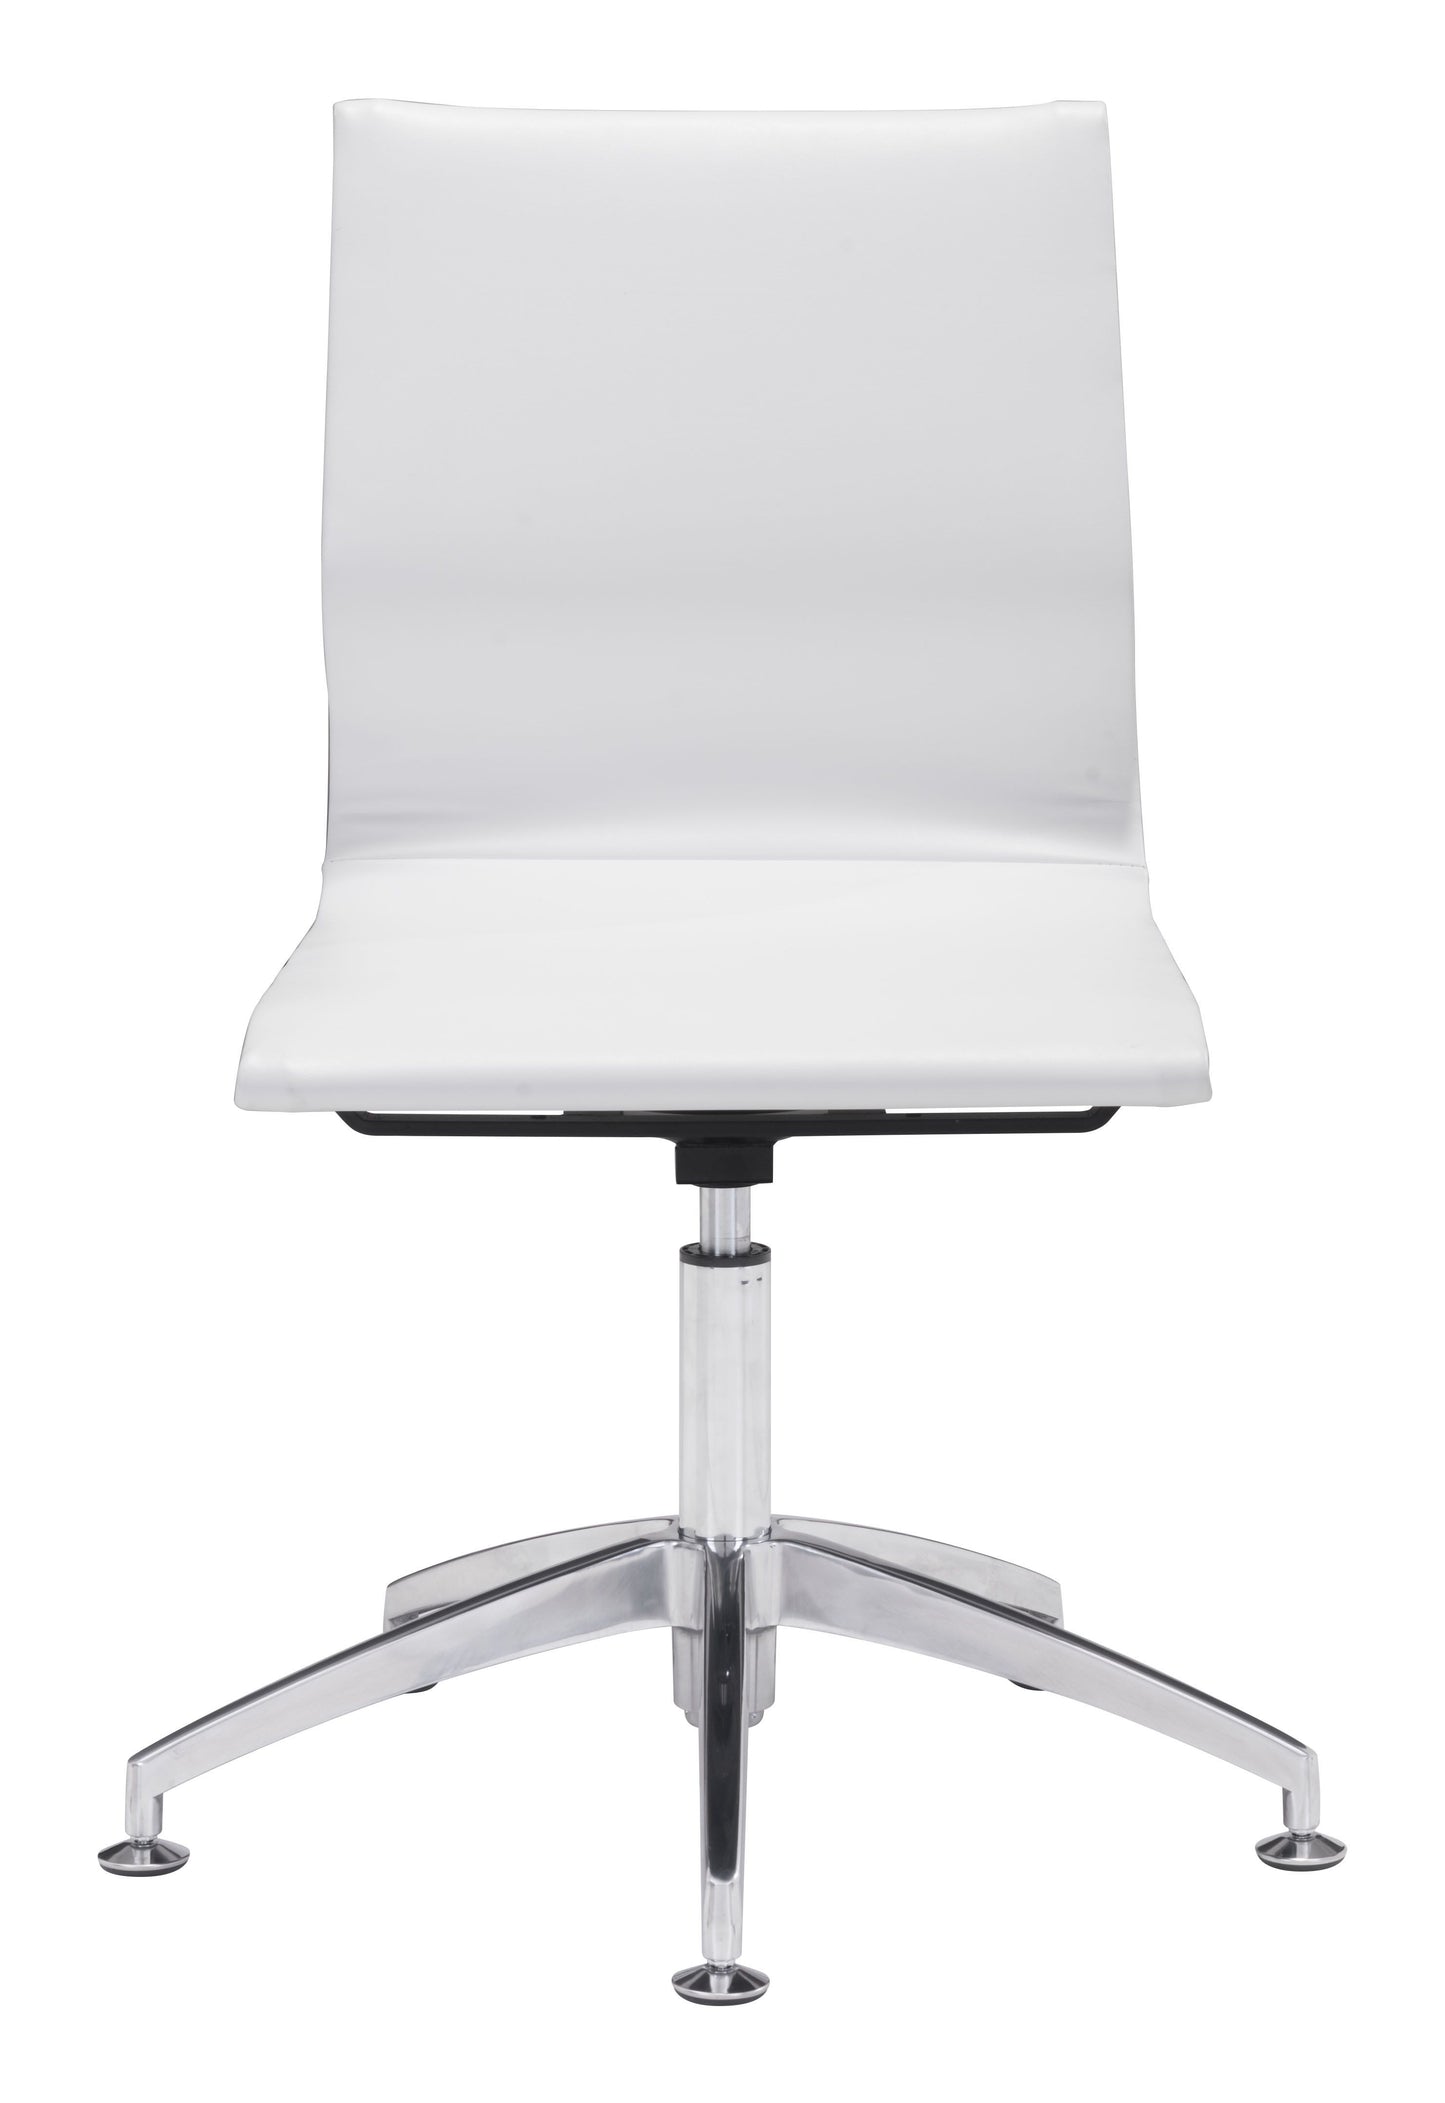 Glider Conference Chair White